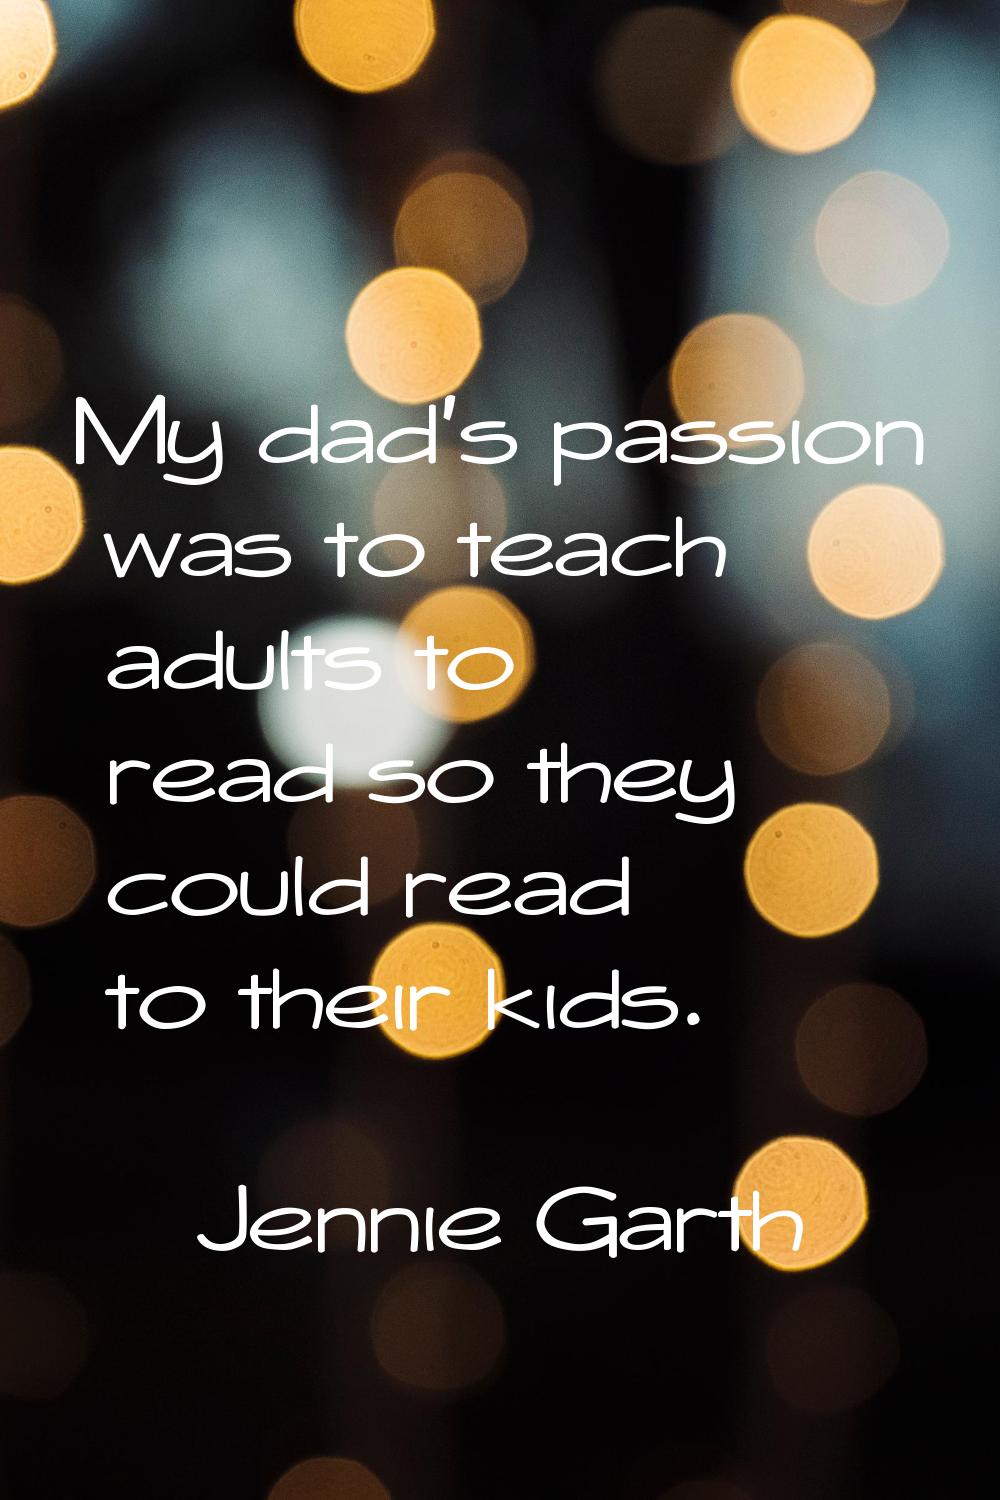 My dad's passion was to teach adults to read so they could read to their kids.